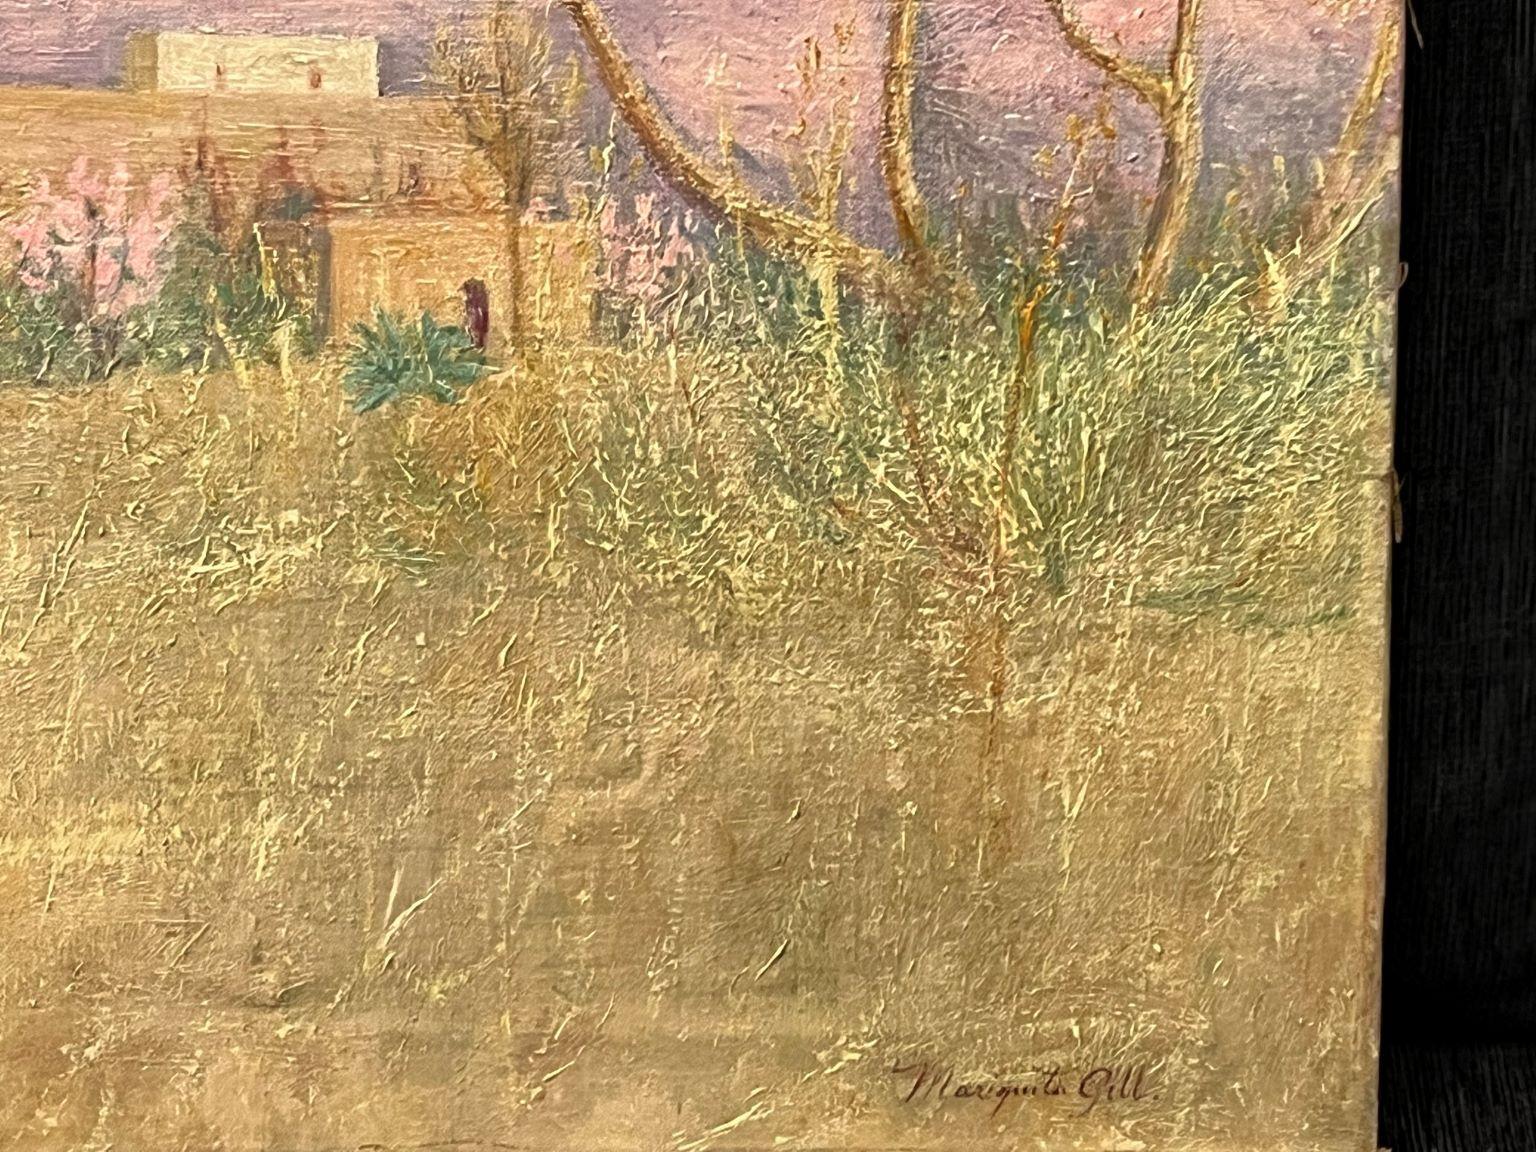 Mariquita Gill Impressionist South Western Painting “Organ Mountains” C.1900’s   In Good Condition For Sale In Bernville, PA